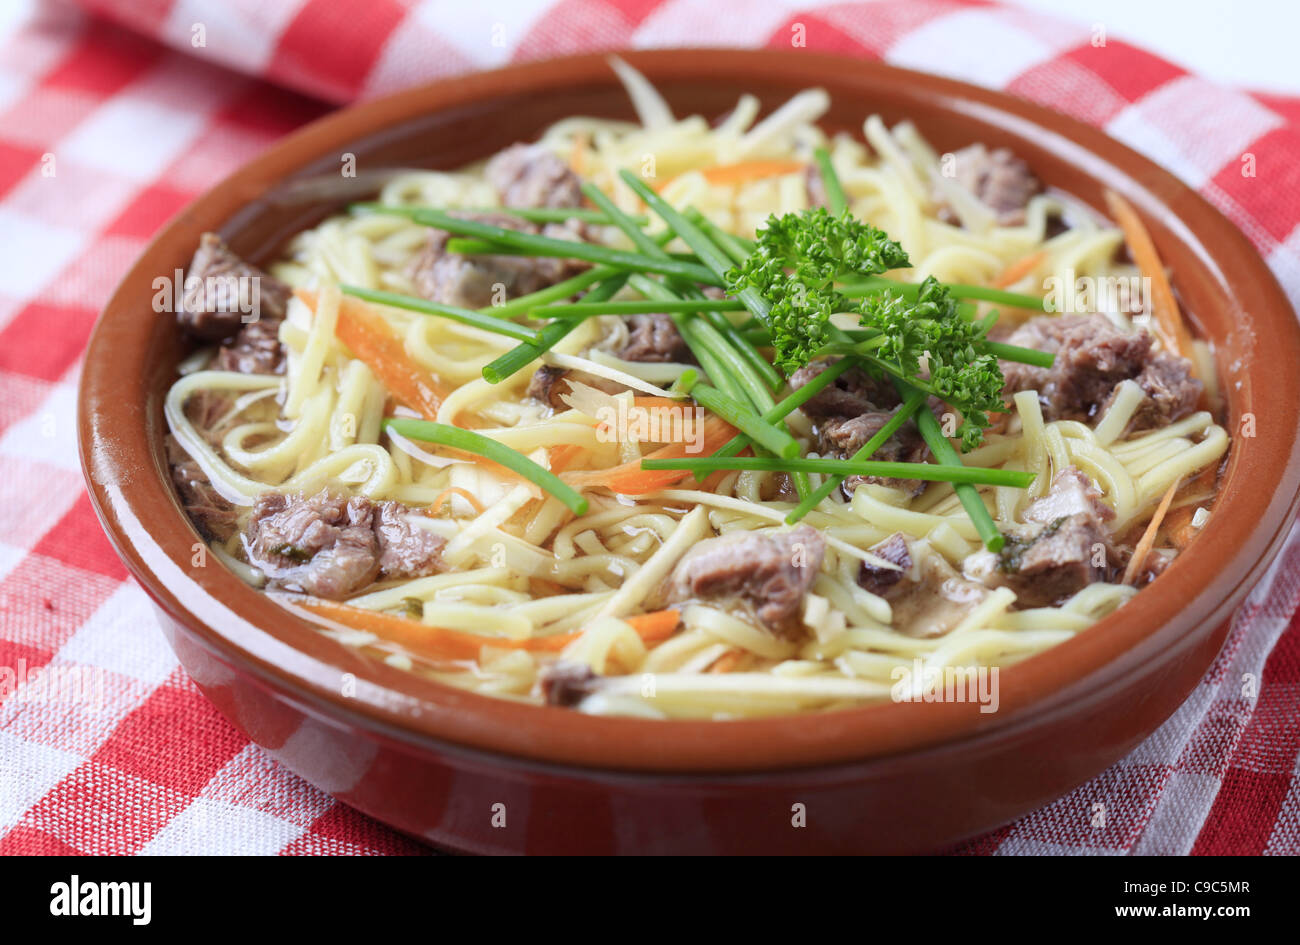 Bowl of beef soup with homemade noodles Stock Photo